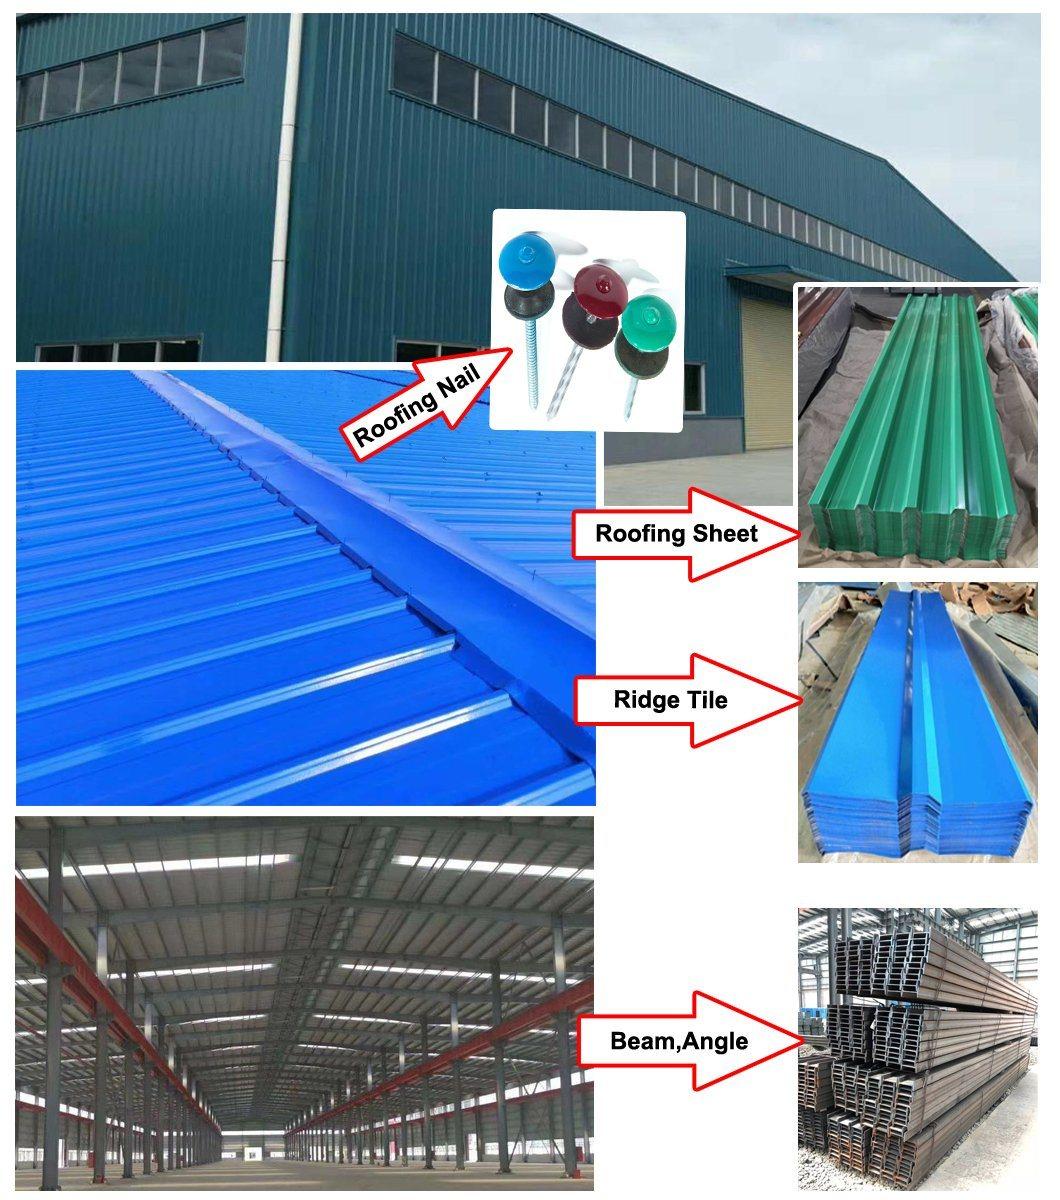 PPGL Roof Tile Building Material Colorful Aluzinc Zinc Ral Color Coated Metal Panel Gi Iron Galvanized Galvalume PPGI Prepainted Corrugated Steel Roofing Sheet